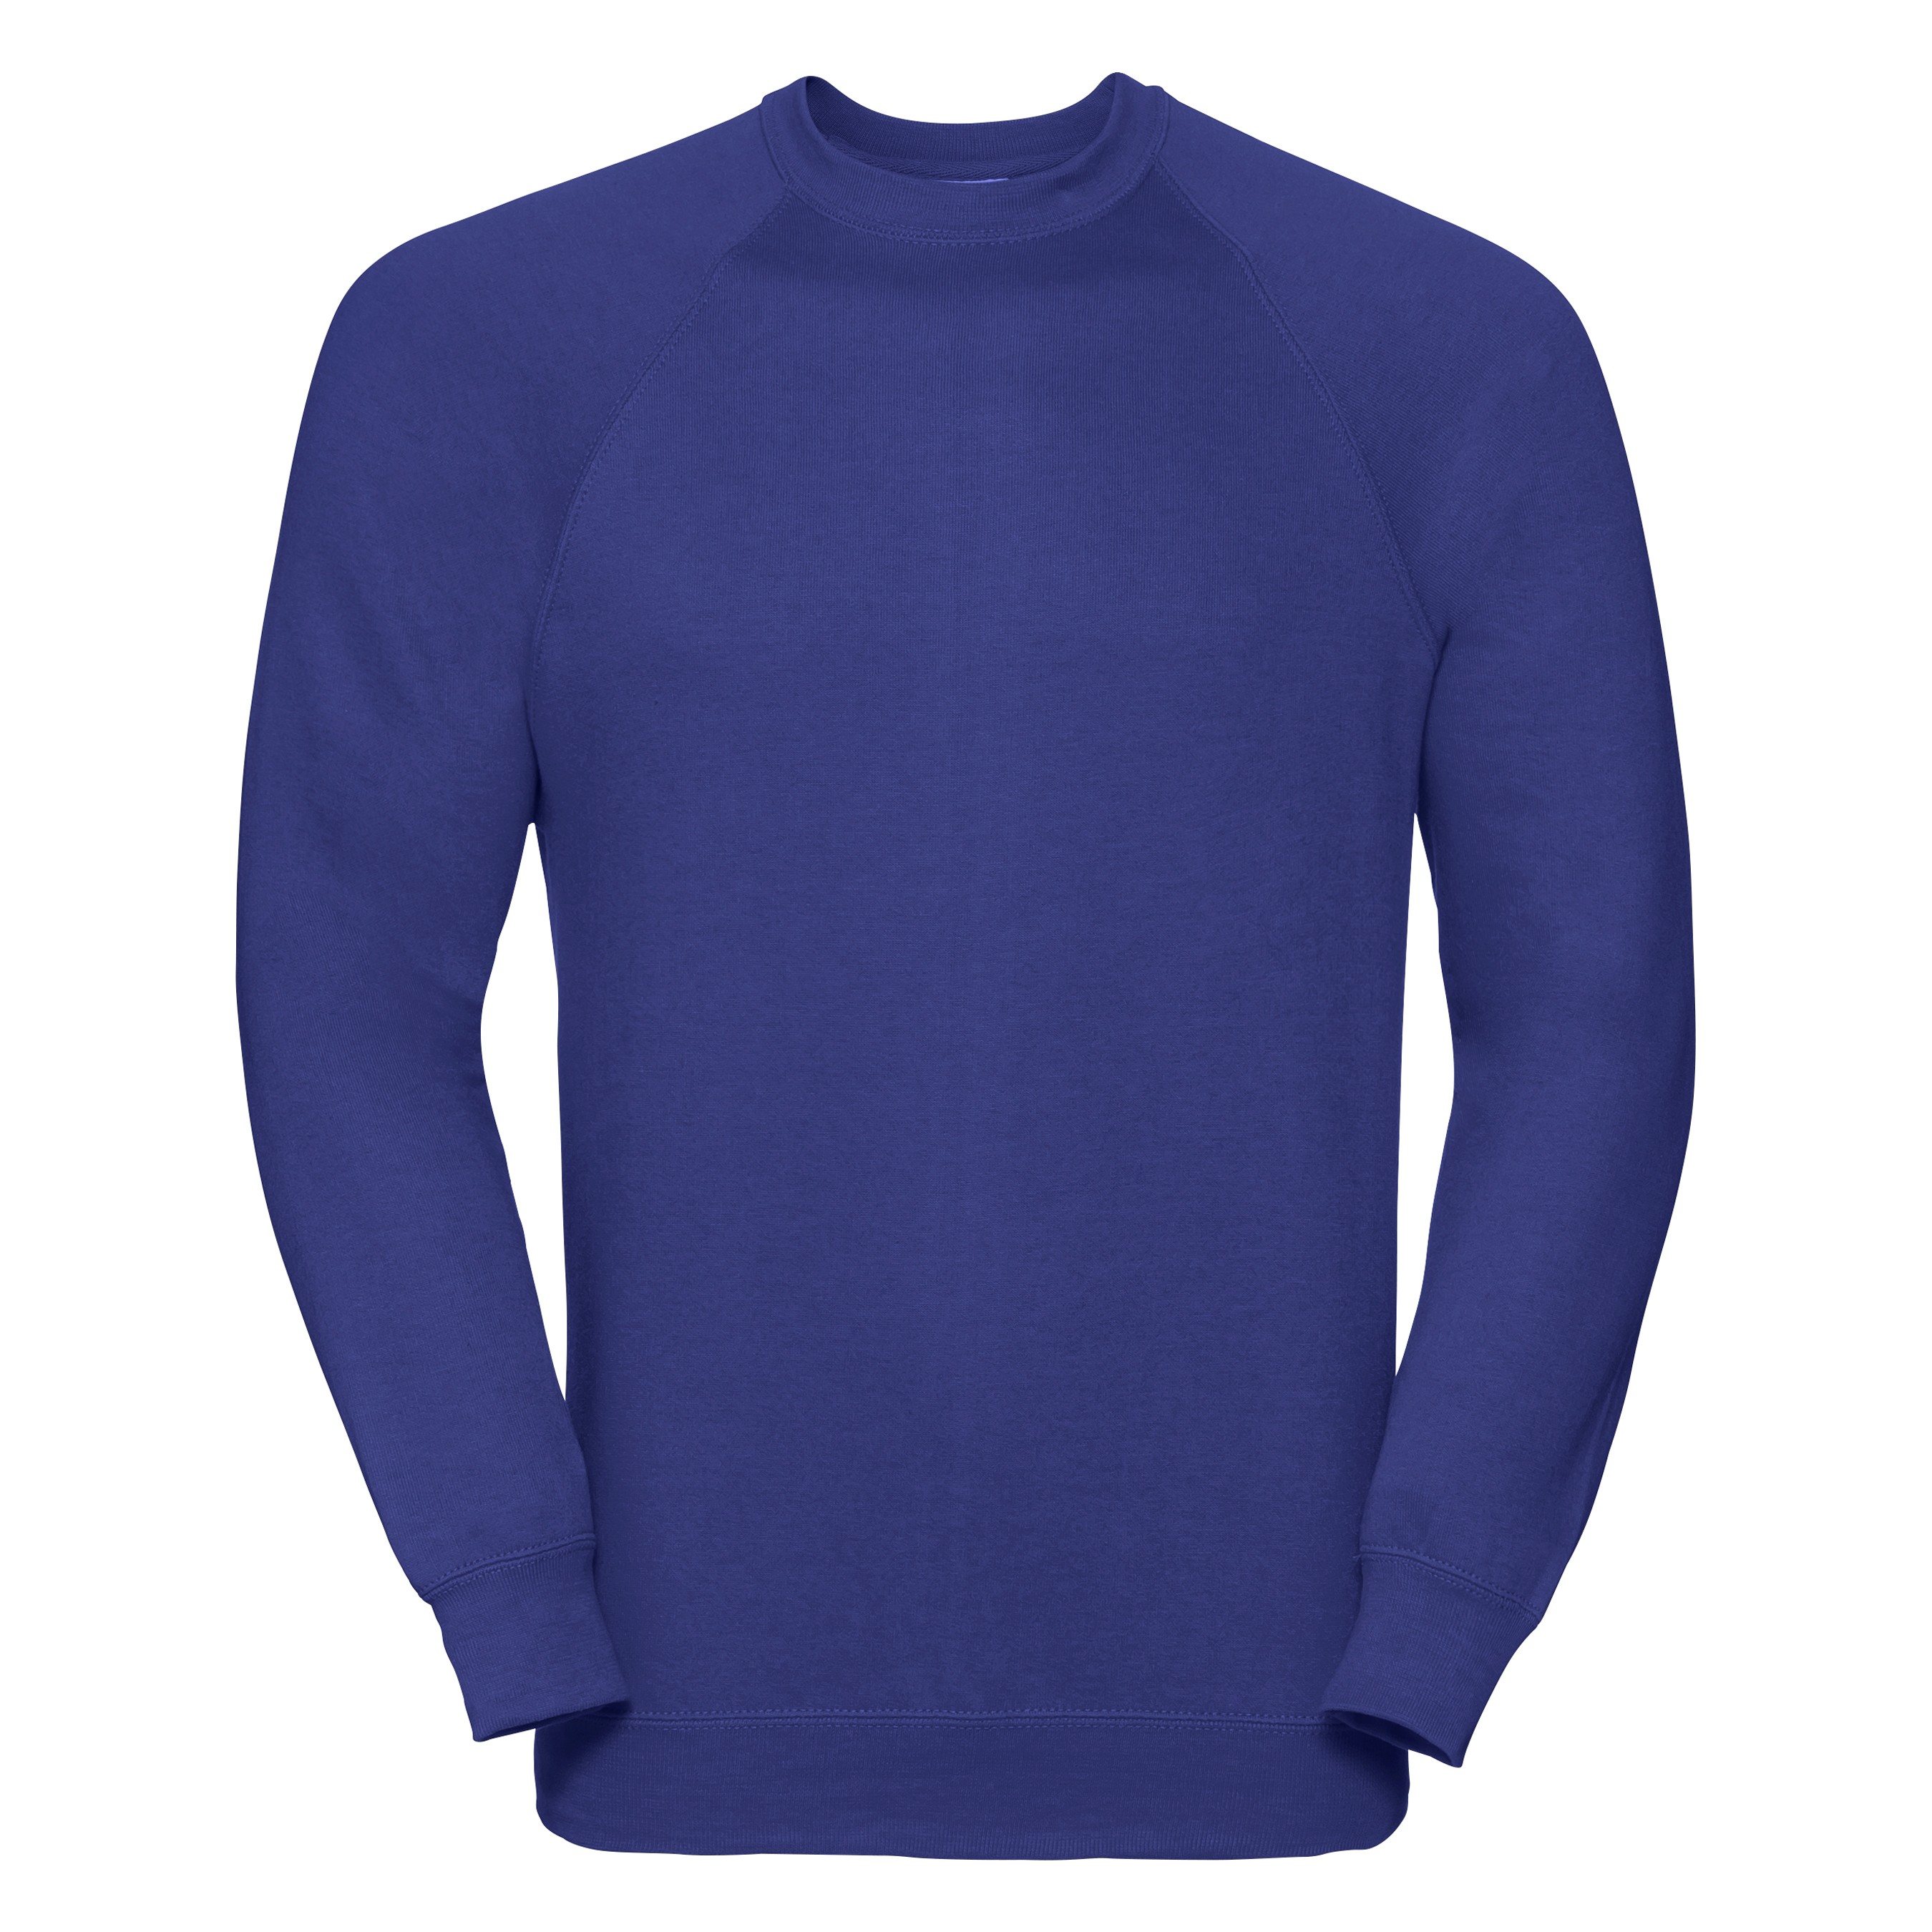 ax-httpswebsystems.s3.amazonaws.comtmp_for_downloadrussell-classic-sweatshirt-bright-royal.jpg